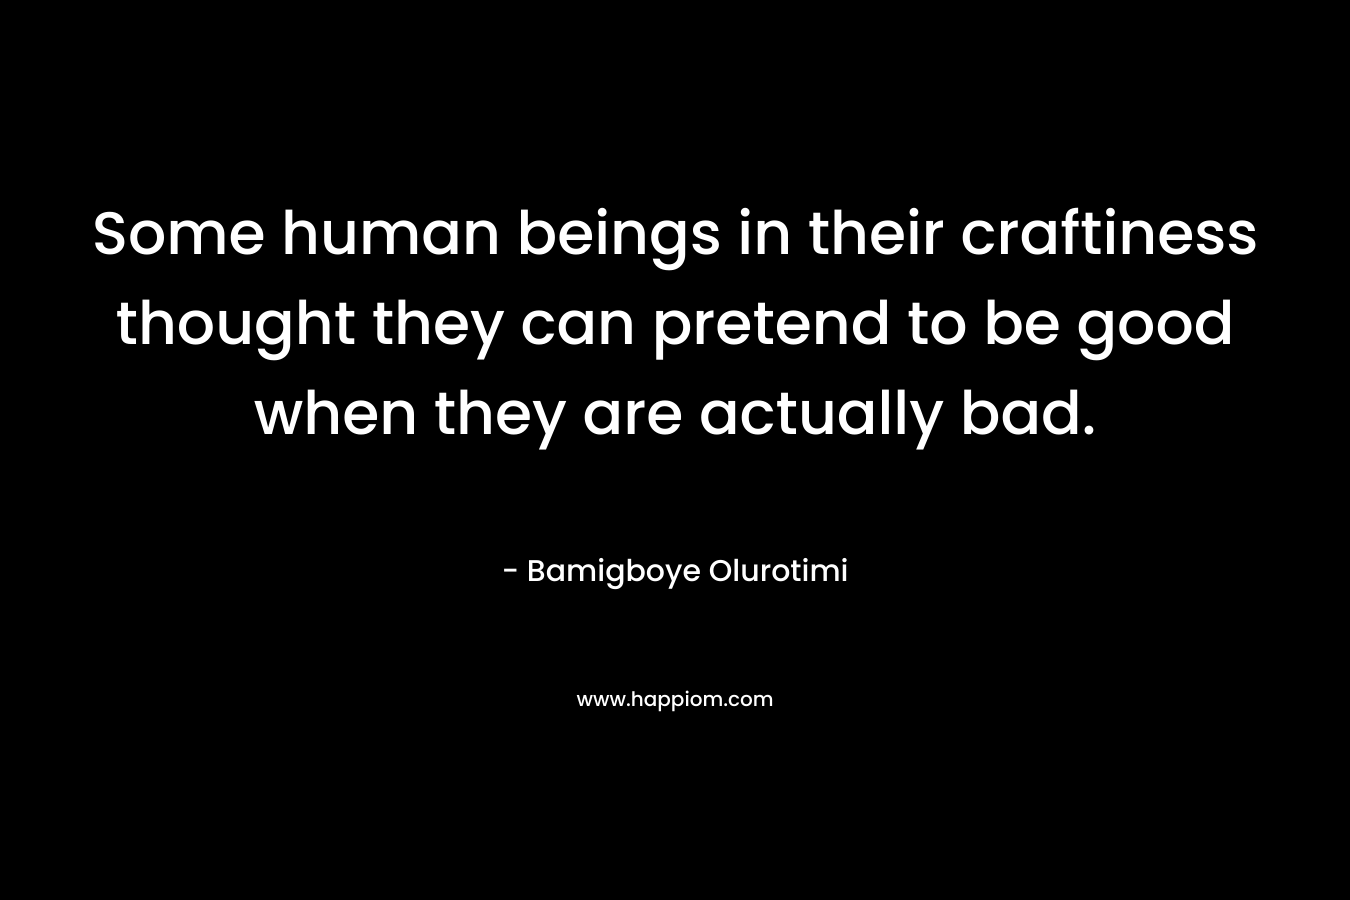 Some human beings in their craftiness thought they can pretend to be good when they are actually bad.